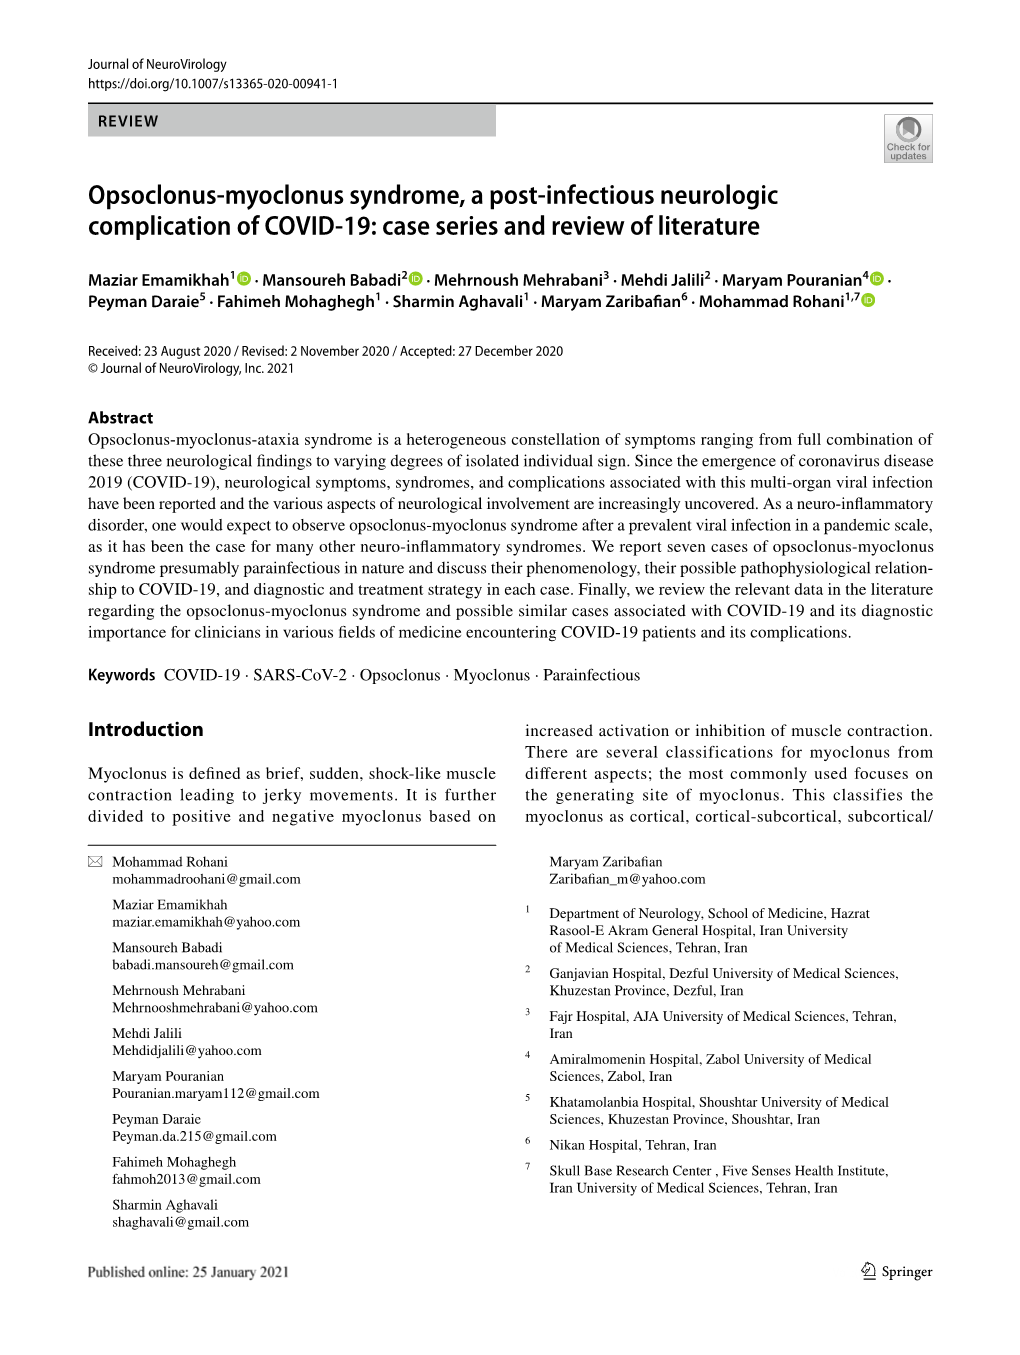 Opsoclonus-Myoclonus Syndrome, a Post-Infectious Neurologic Complication of COVID-19: Case Series and Review of Literature